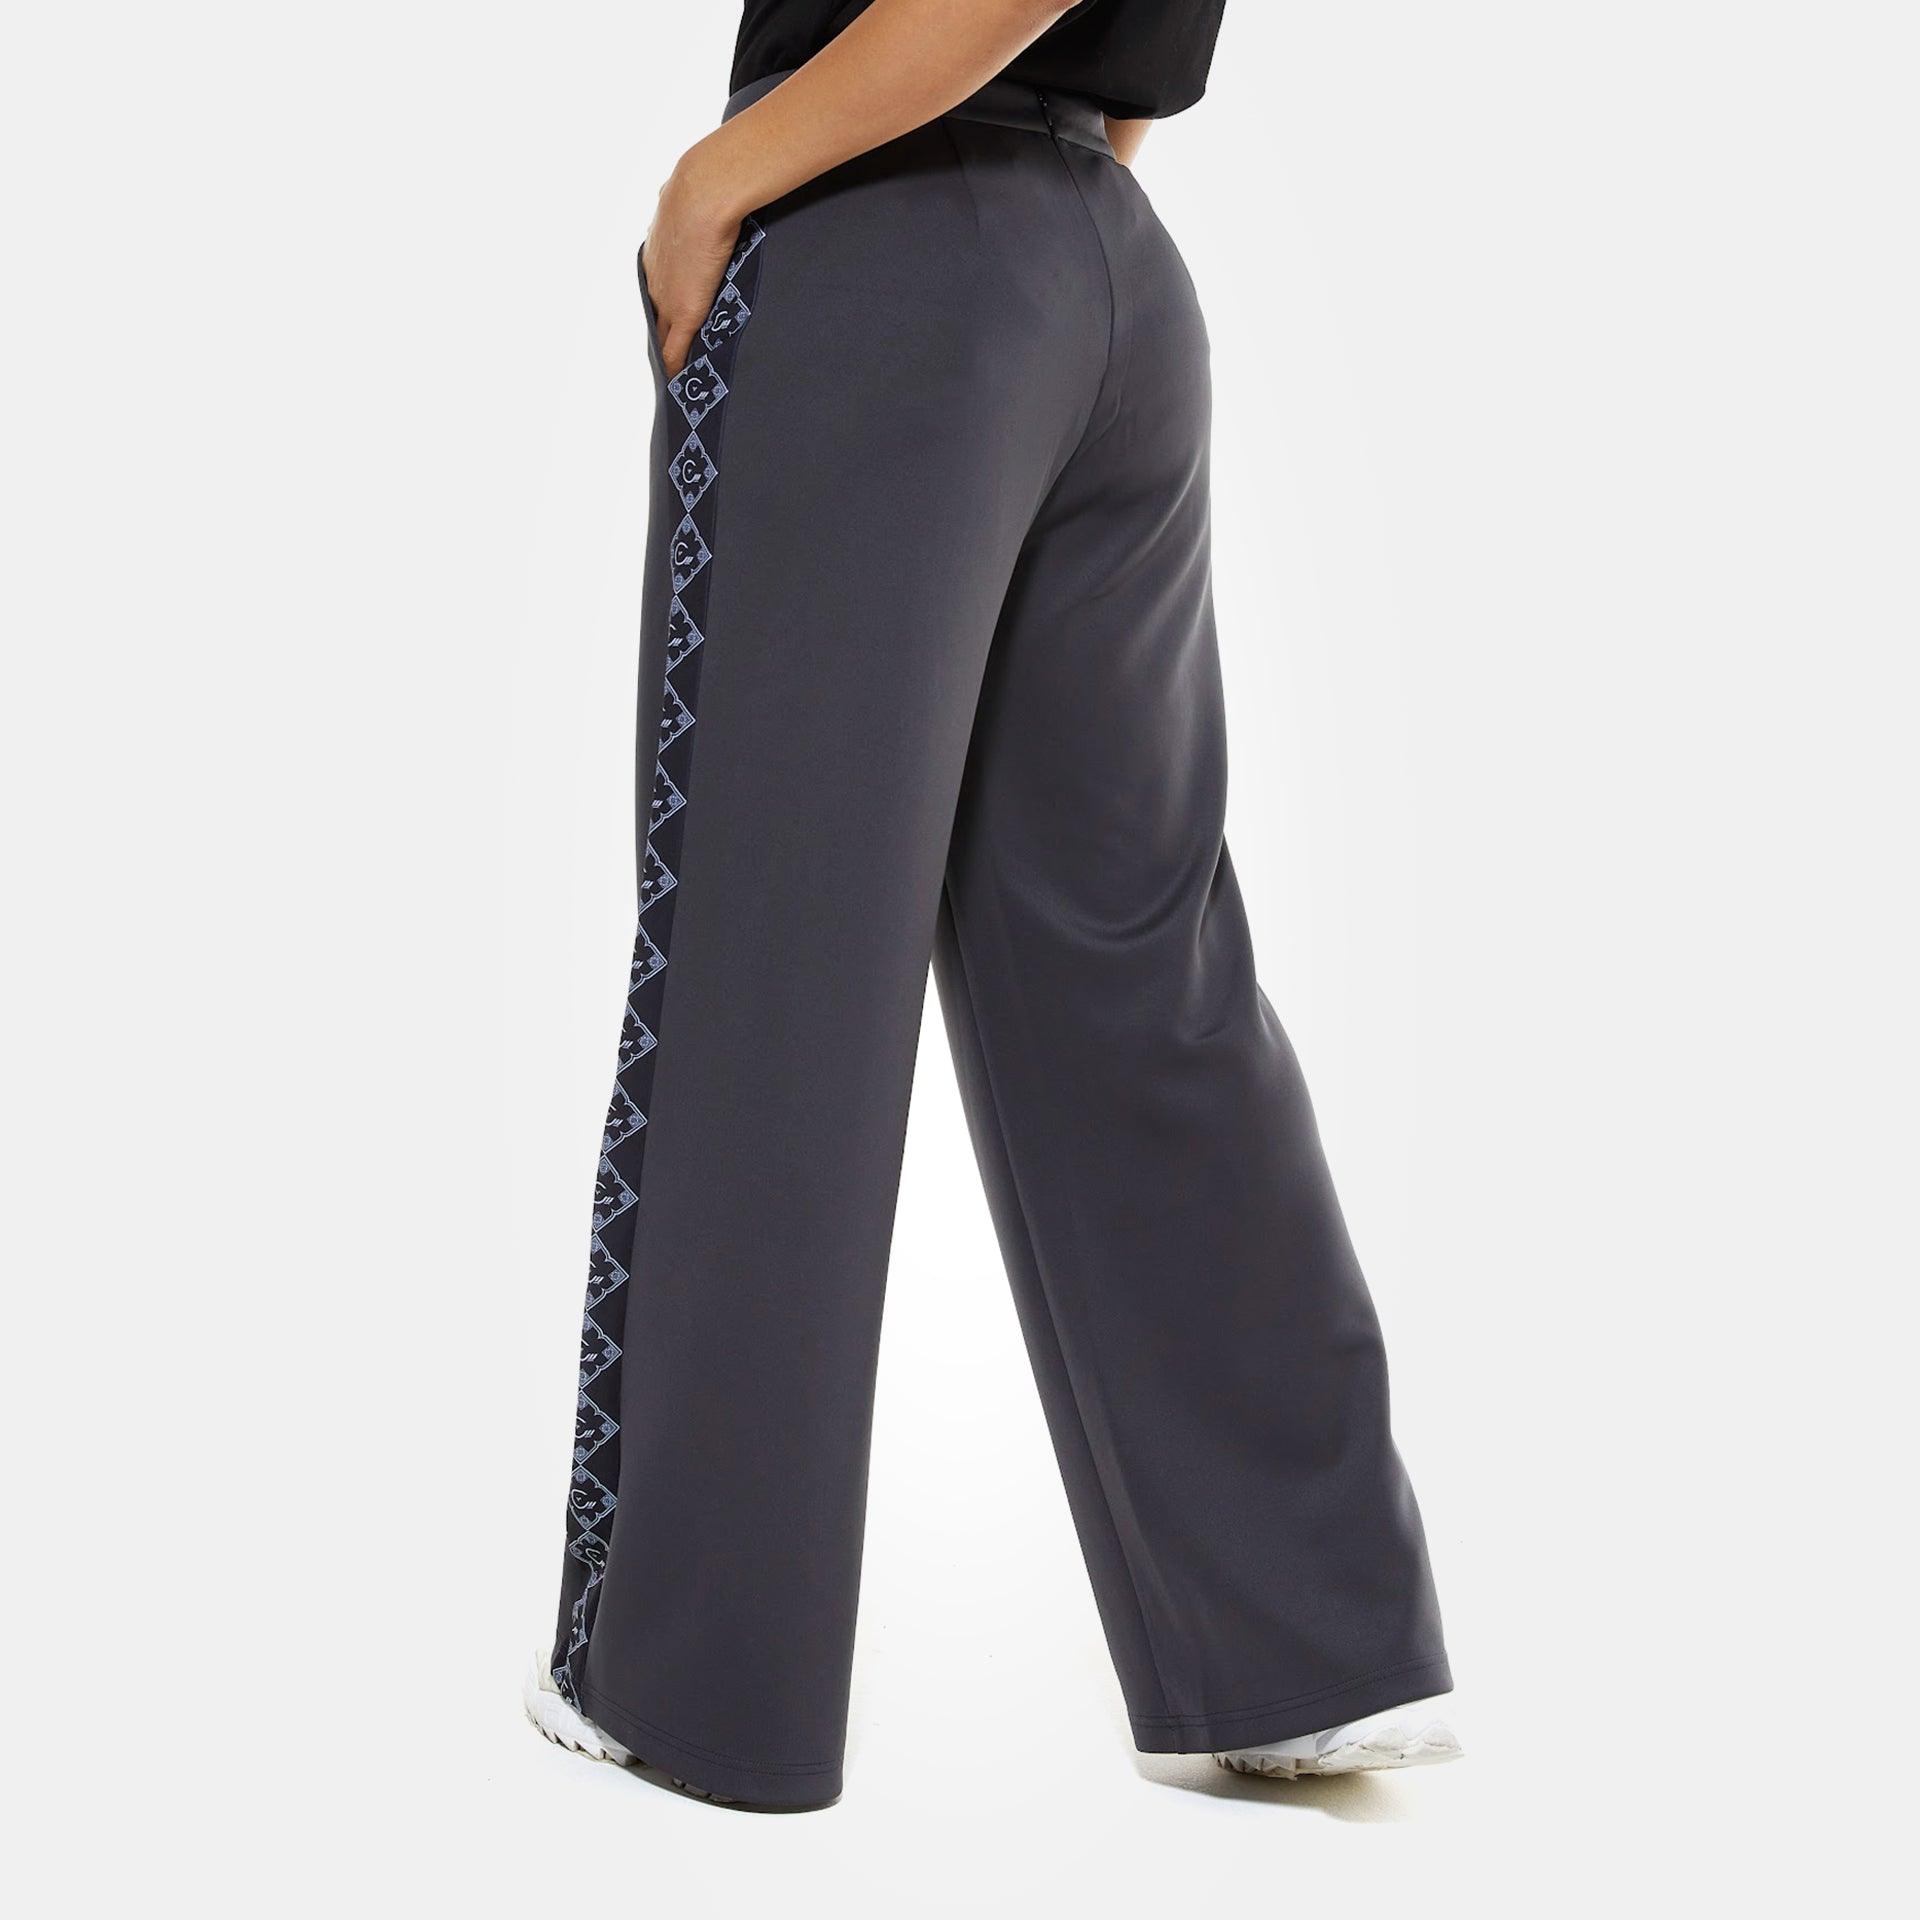 BLACK HIGH WAIST TROUSERS FROM HOUSE OF CENMAR - WECRE8